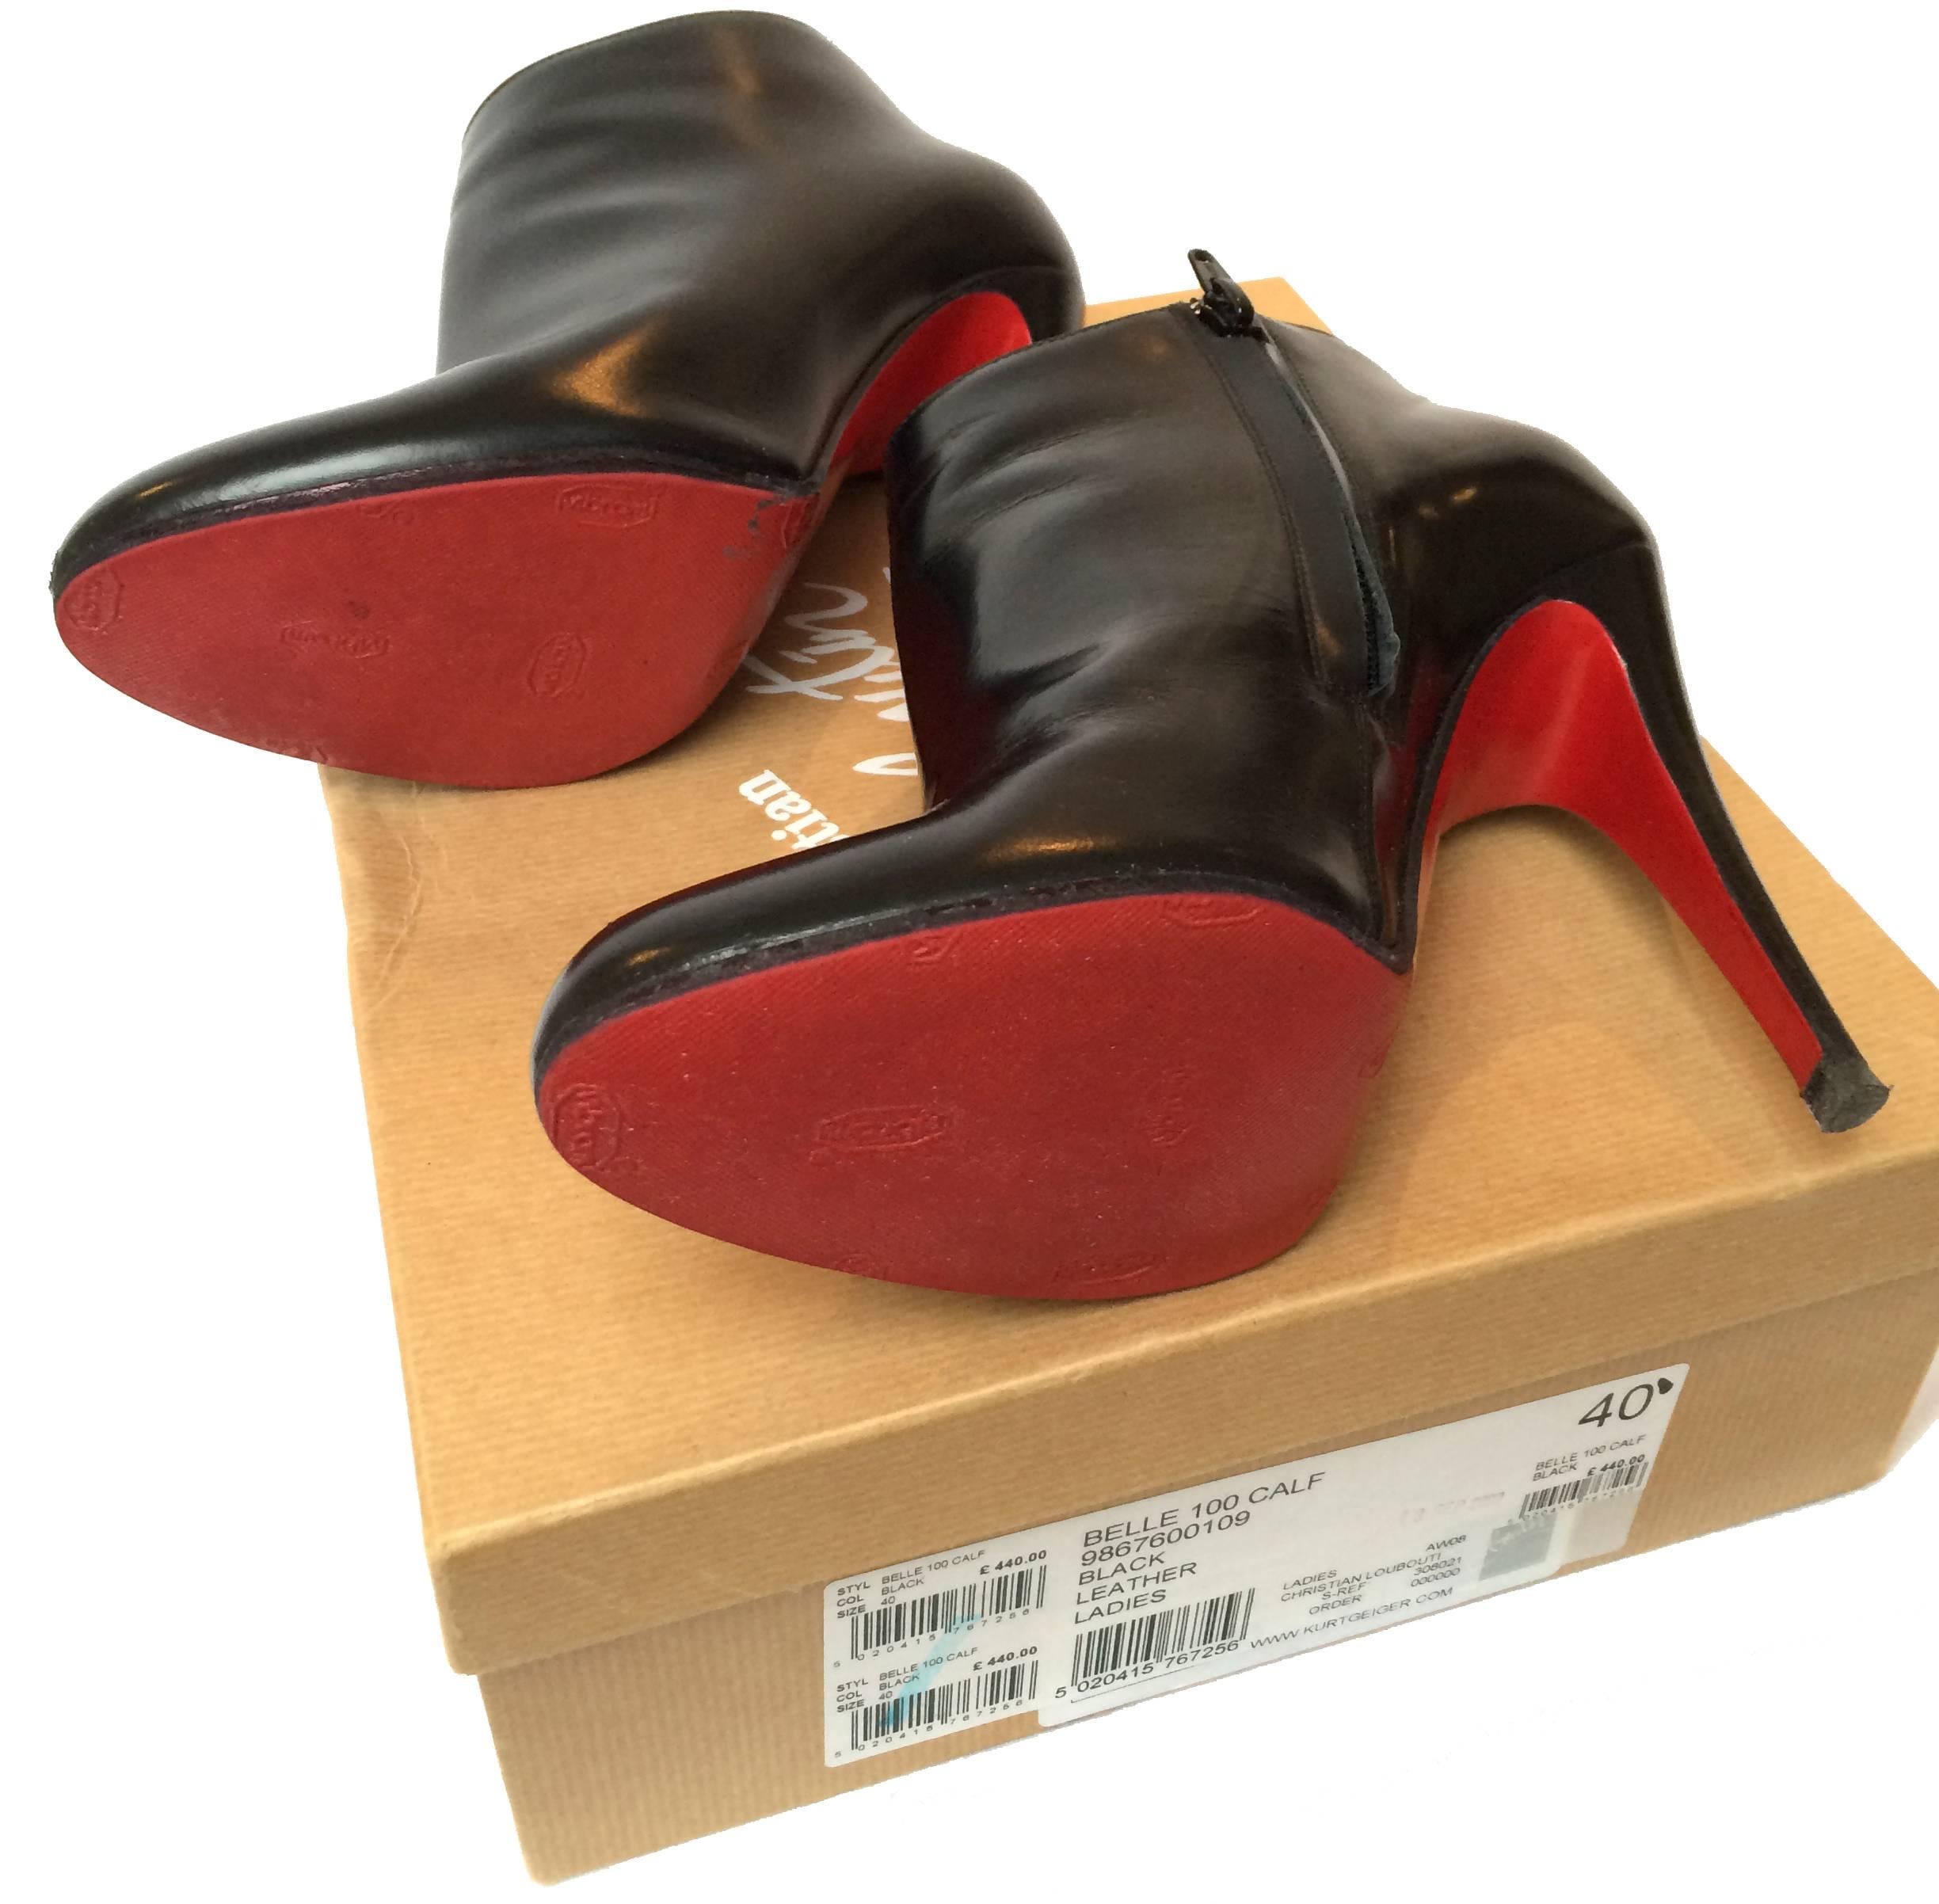 Cut from the finest calf leather these ankle boots have a round toe and the Louboutin signature stiletto heel.

The leather covered heels are approximately 4